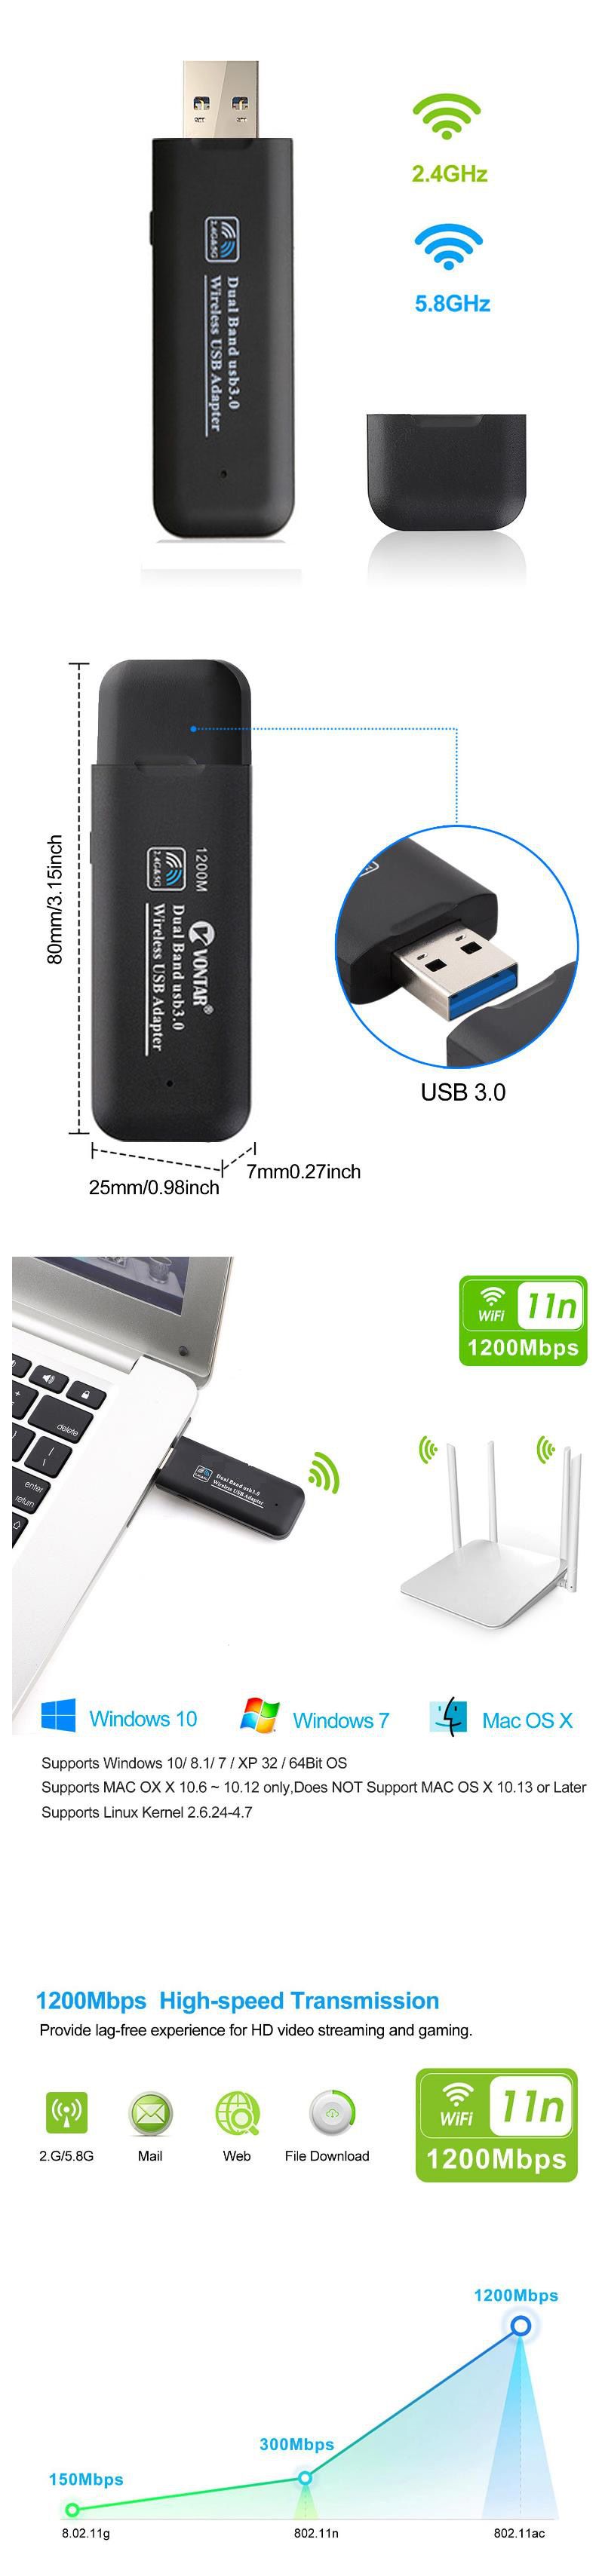 AC1200-Dual-band-Wireless-Network-Card-WiFi-Receiver-Wireless-Receiver-USB-Adapter-Laptop-Accessorie-1567515